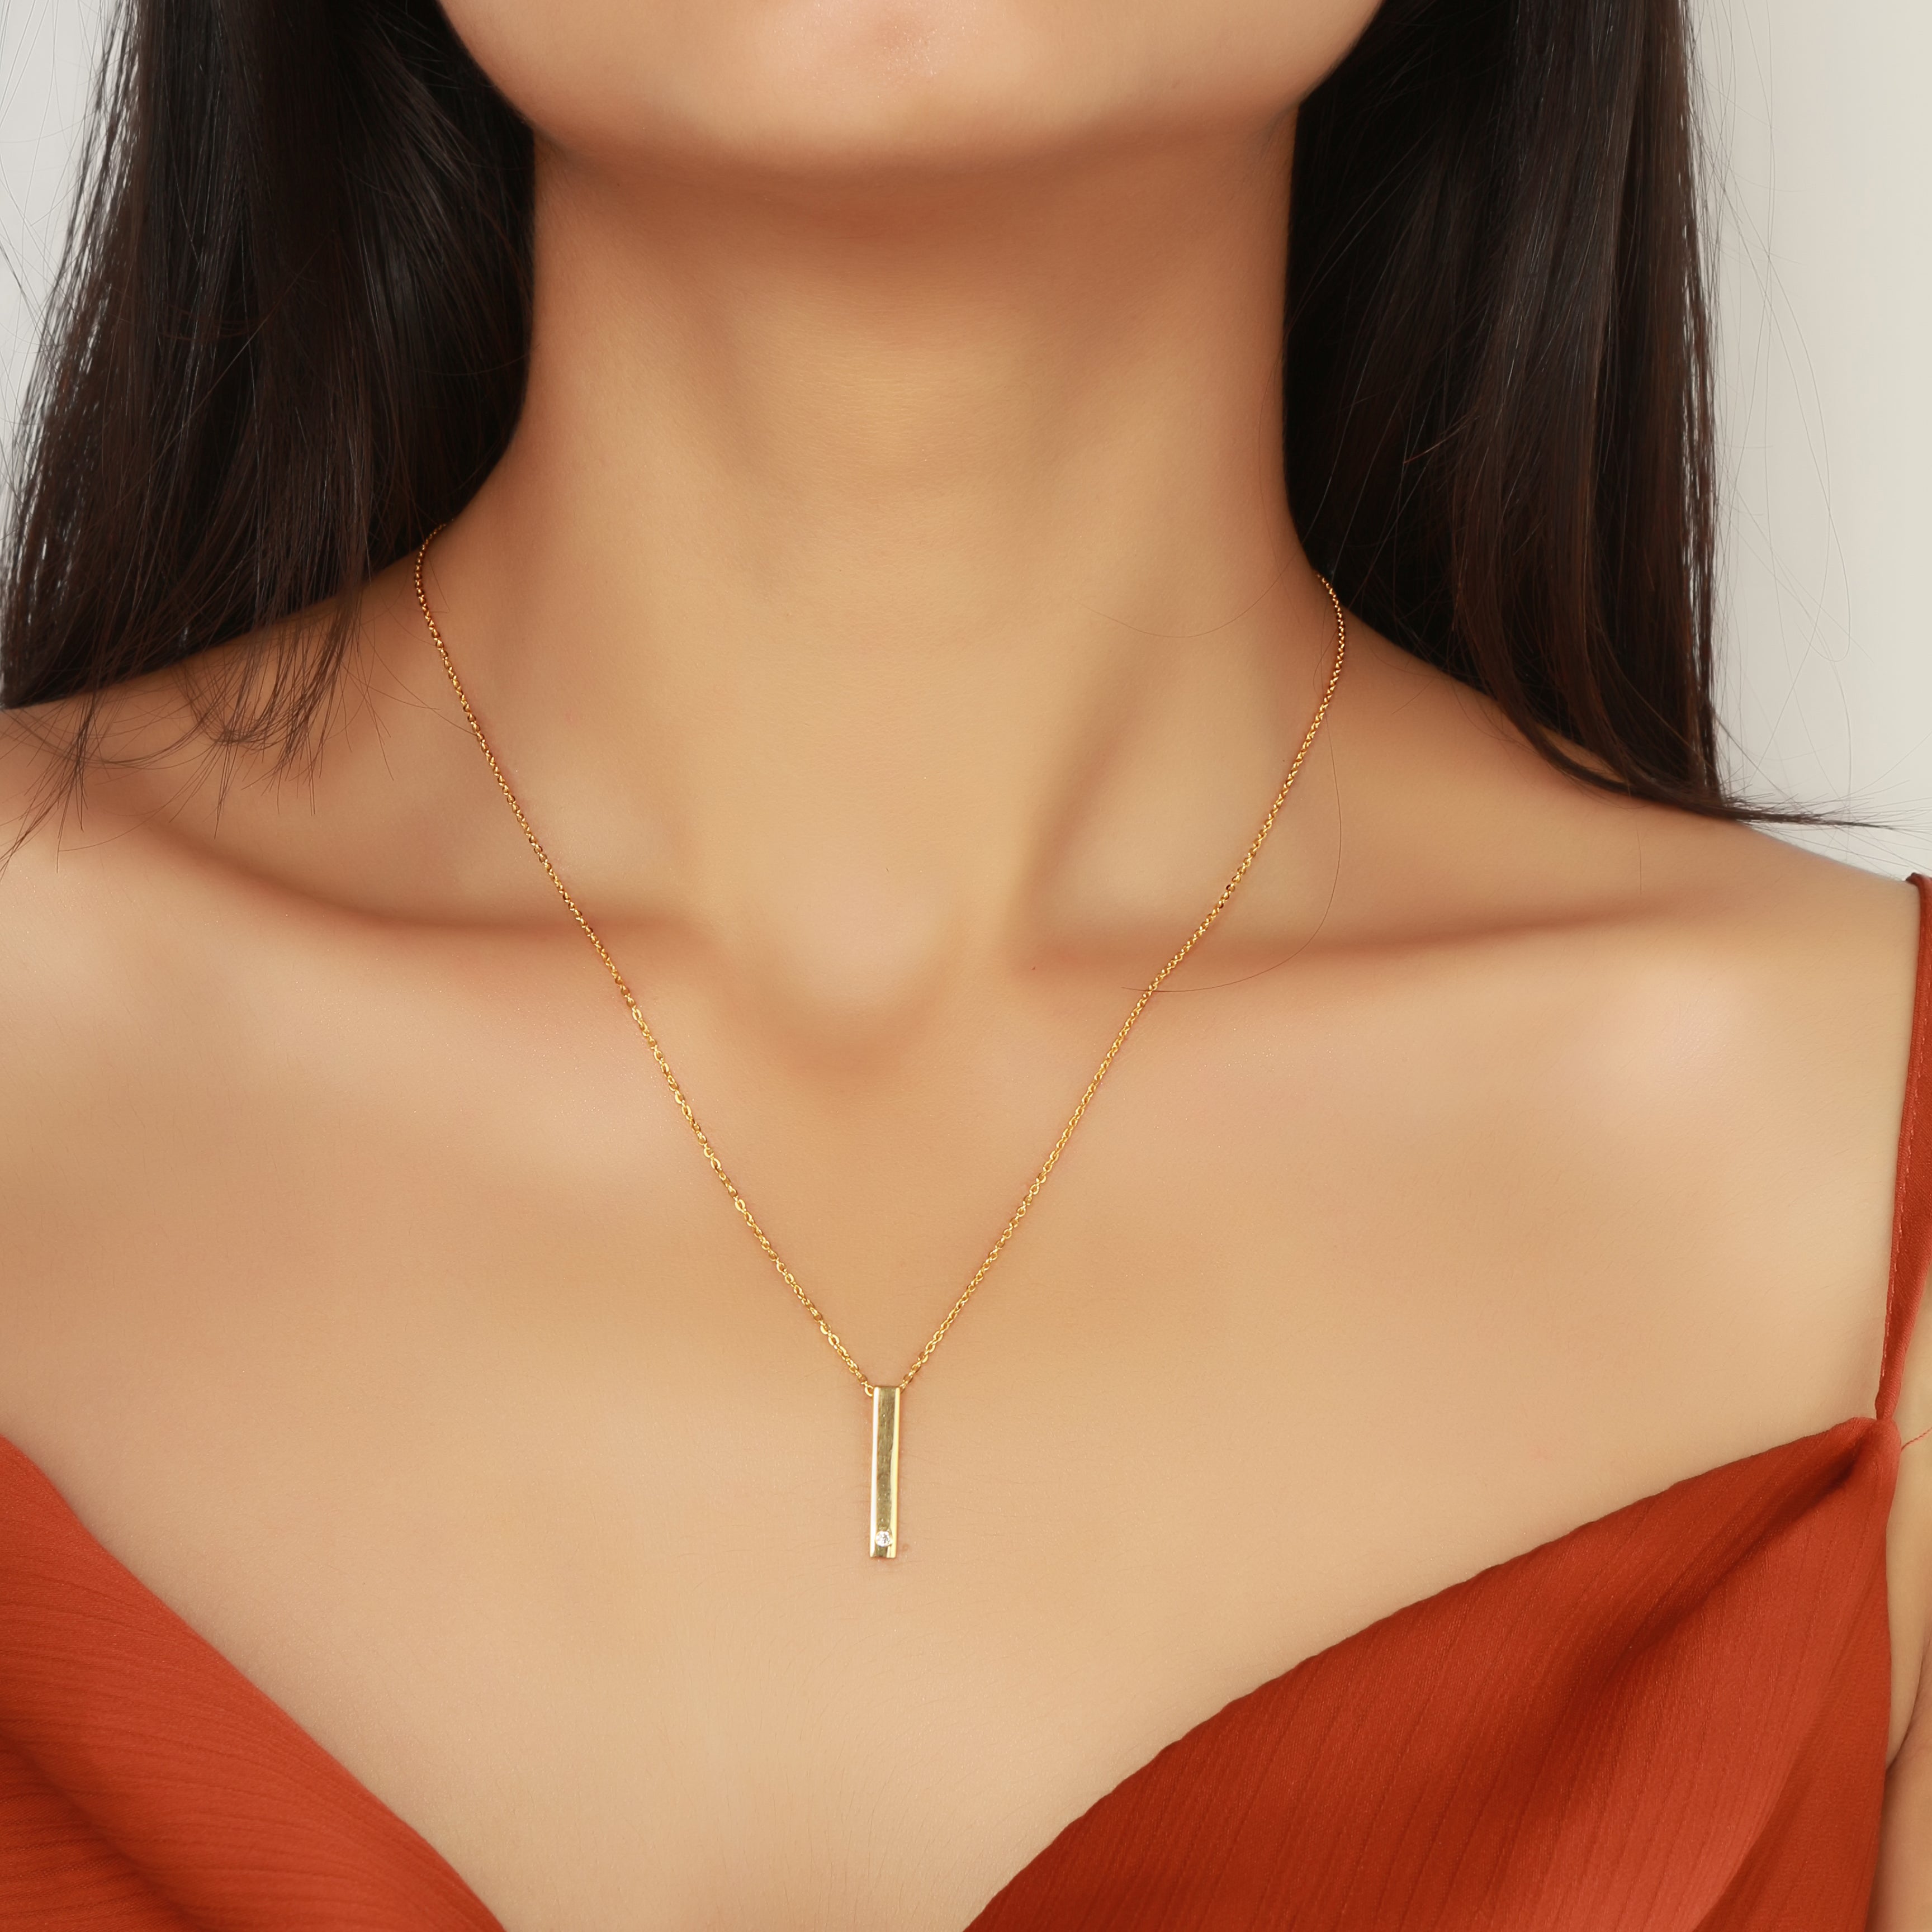 Buy Cool For The Summer Pendant Necklace In 925 Silver from Shaya by  CaratLane